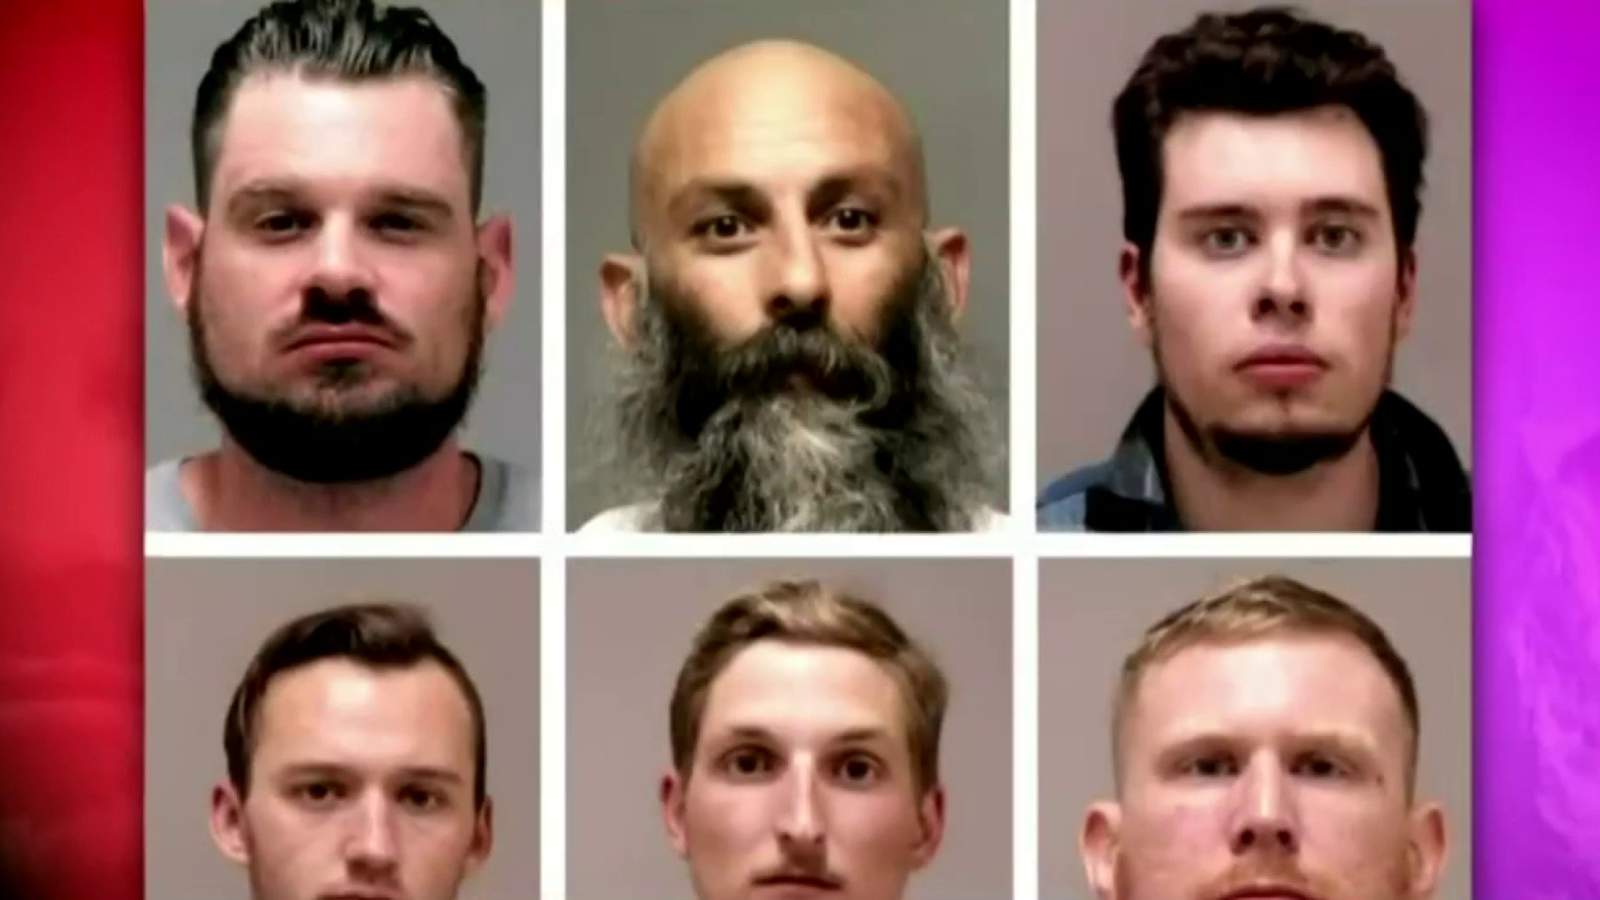 Federal grand jury indicts 6 in terrorist plot to kidnap Gov. Whitmer